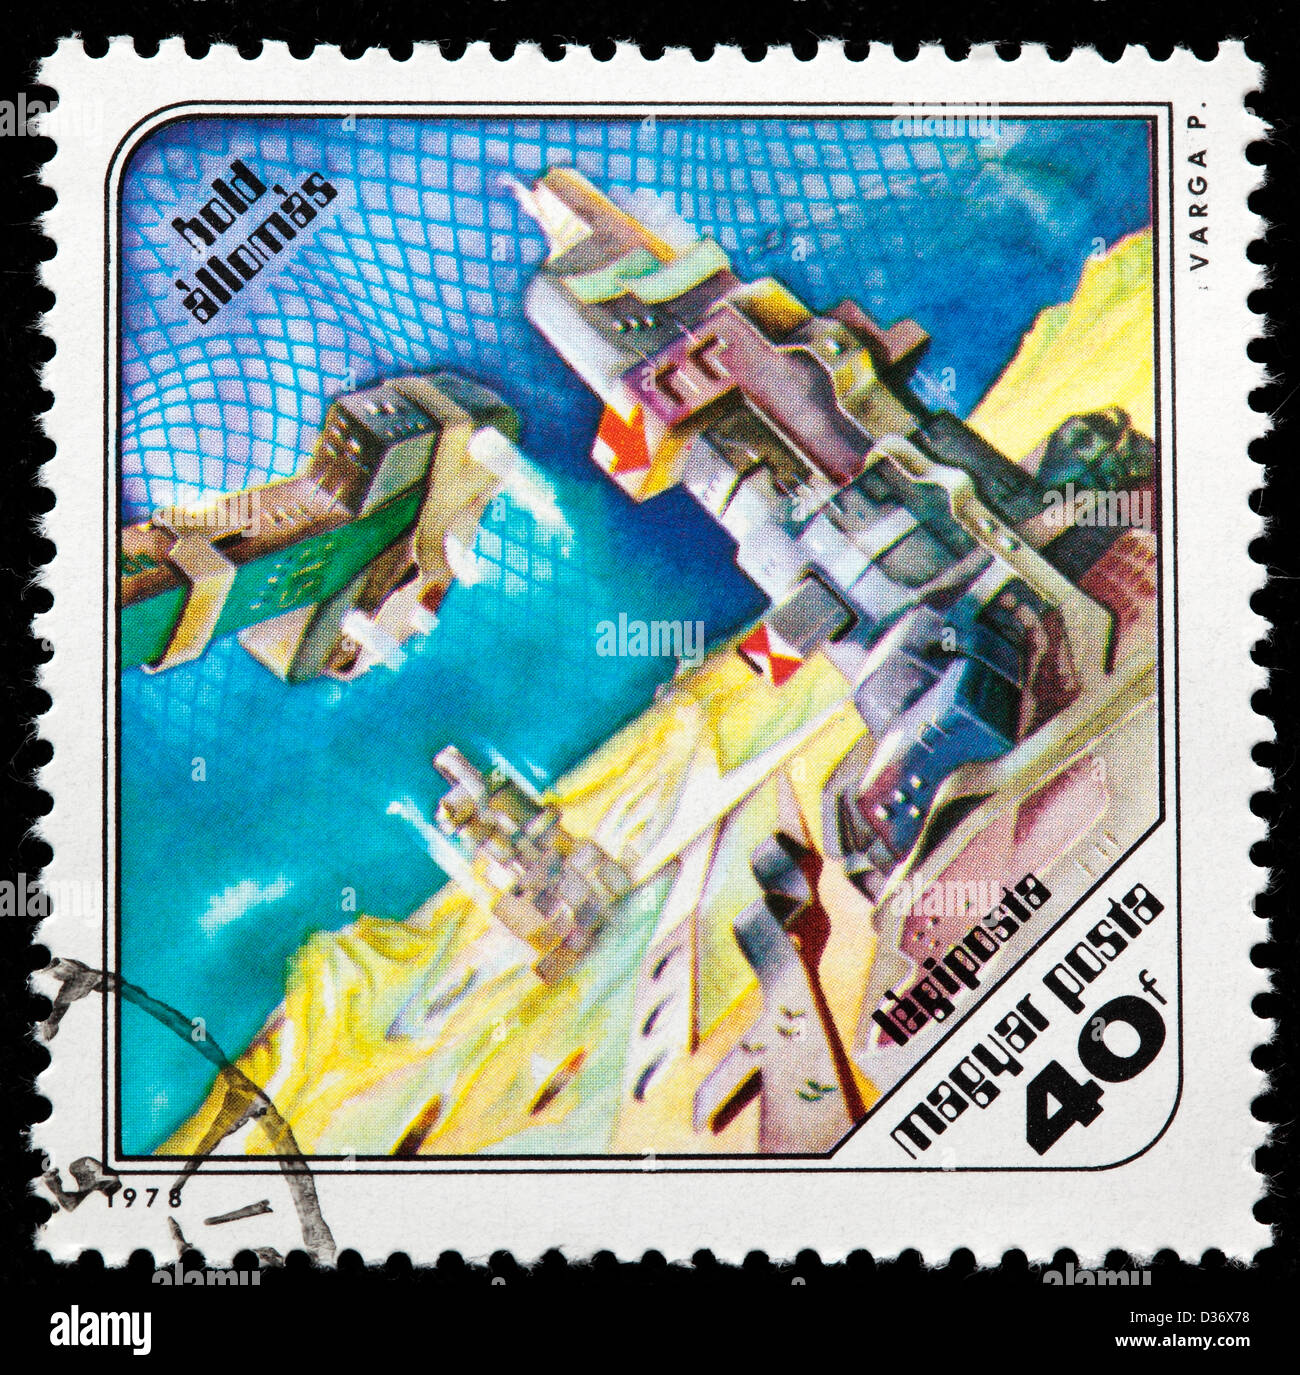 Moon station, science fiction painting by Pal Varga, postage stamp, Hungary, 1978 Stock Photo